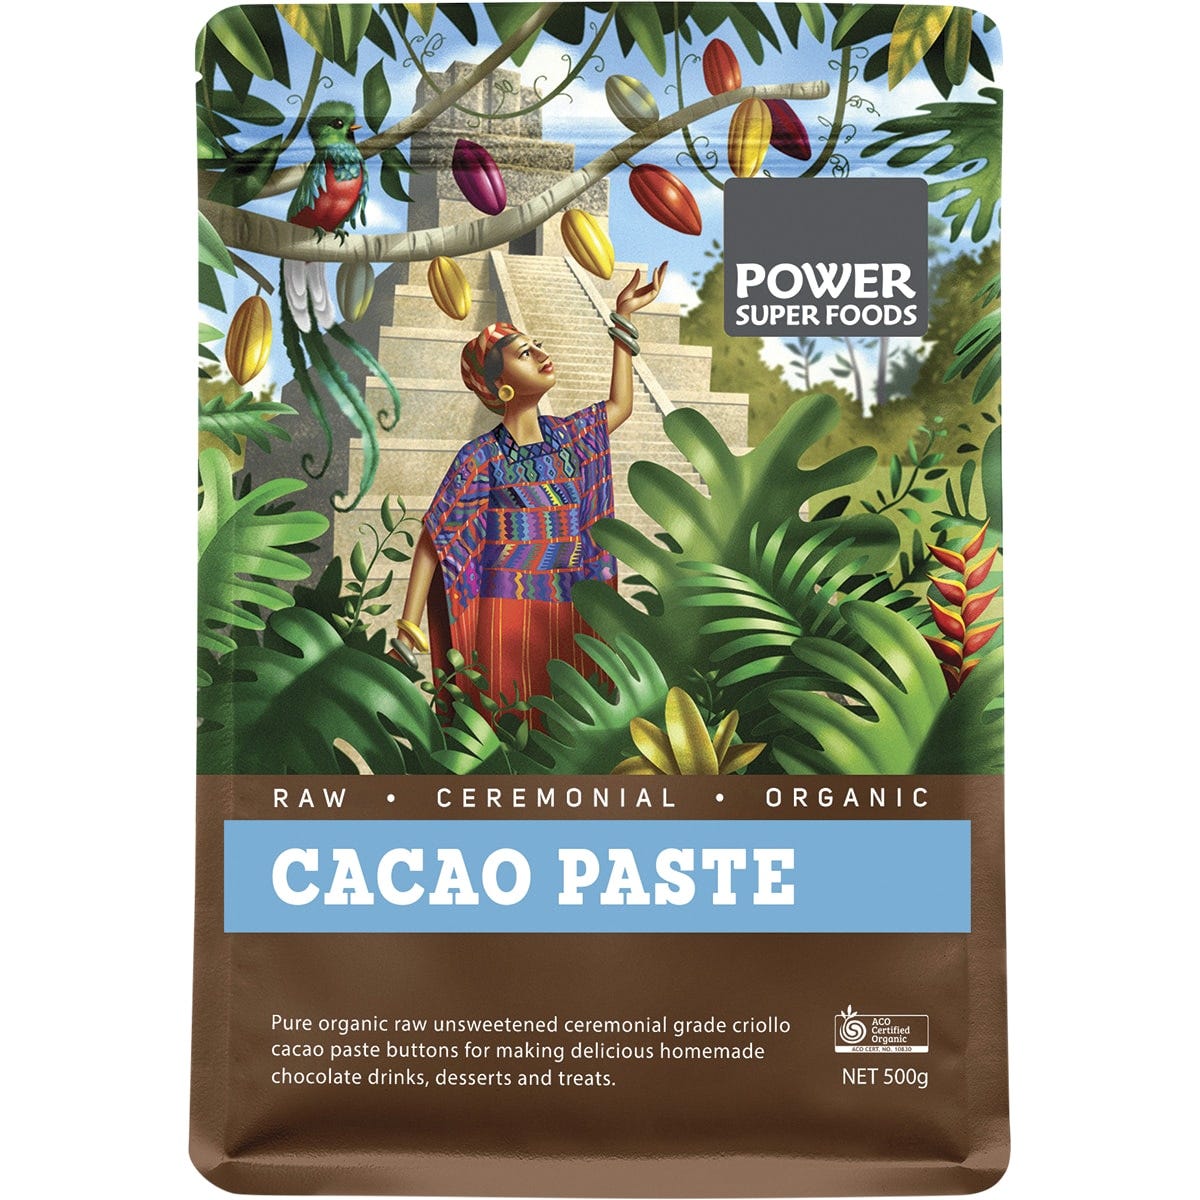 Cacao Paste Buttons The Origin Series